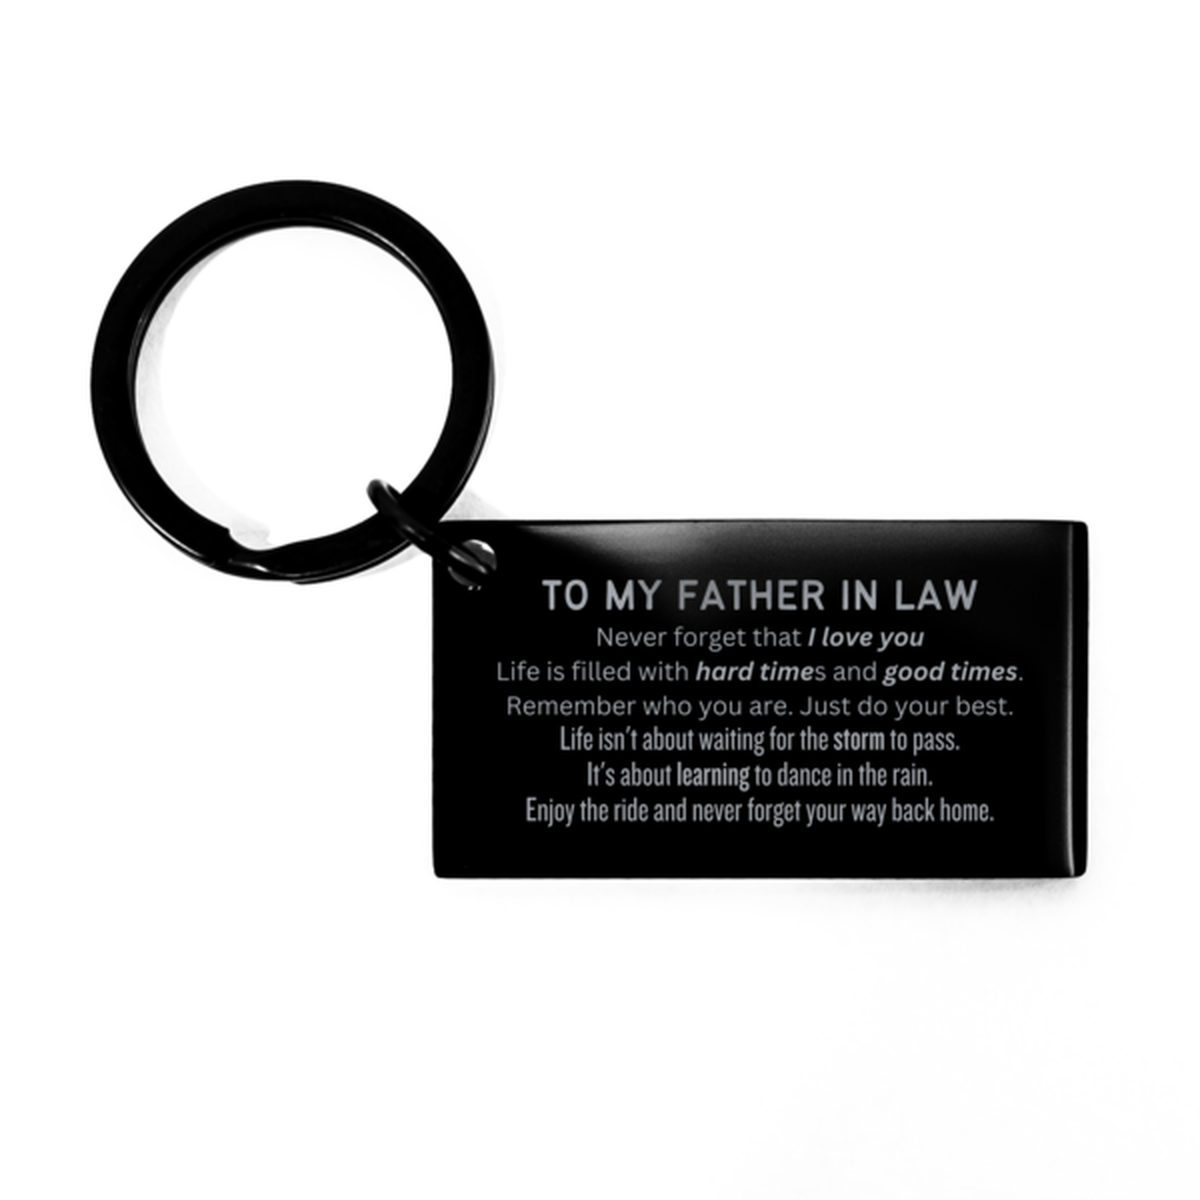 Christmas Father In Law Keychain Gifts, To My Father In Law Birthday Thank You Gifts For Father In Law, Graduation Unique Gifts For Father In Law To My Father In Law Never forget that I love you life is filled with hard times and good times. Remember who